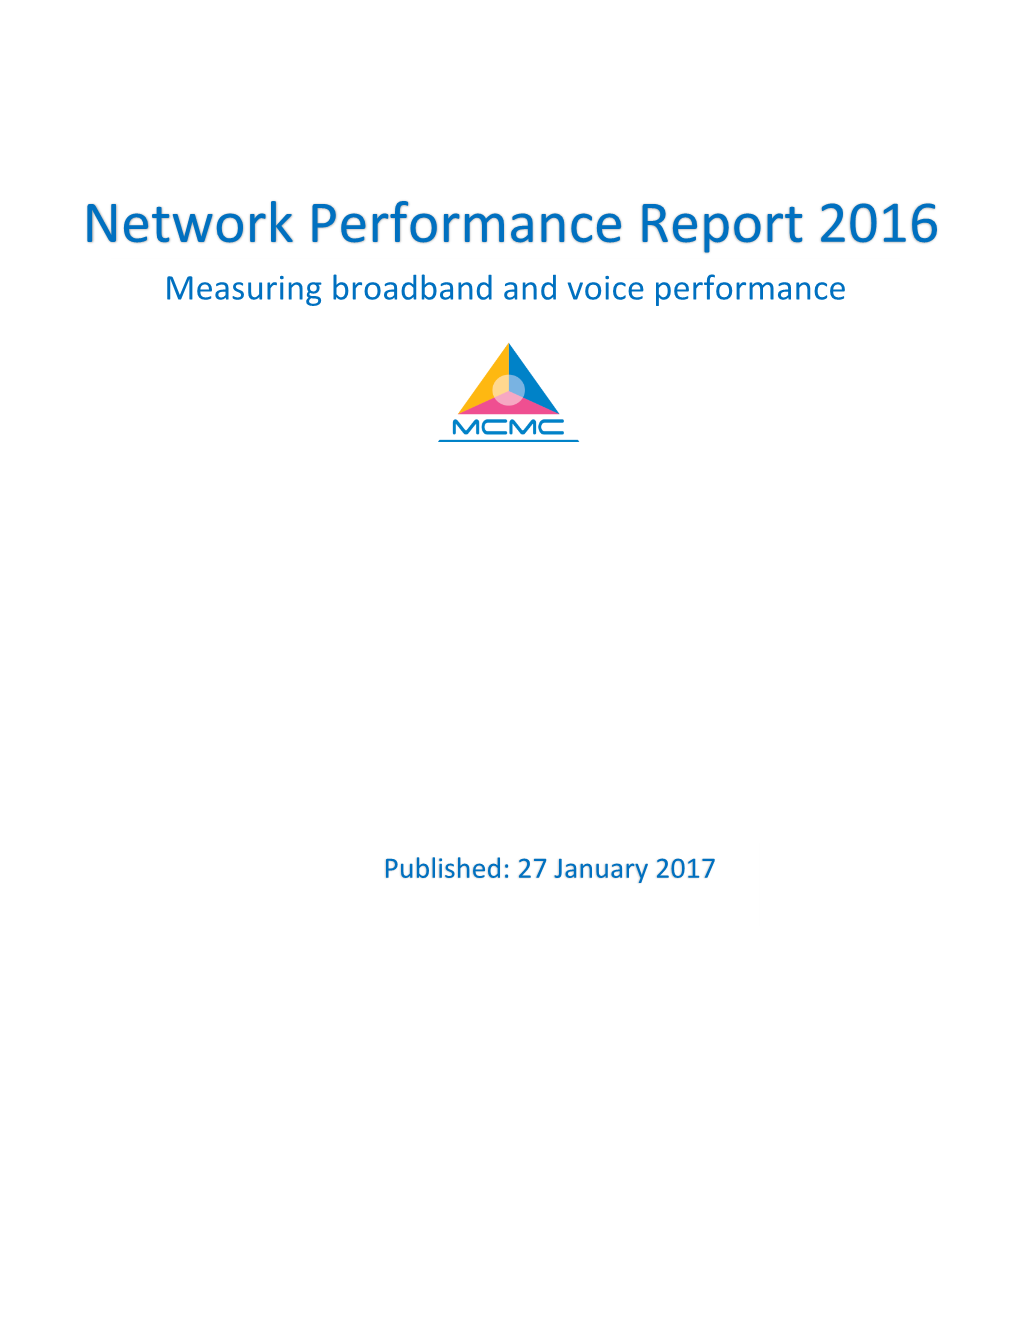 Network Performance Report 2016 Measuring Broadband and Voice Performance